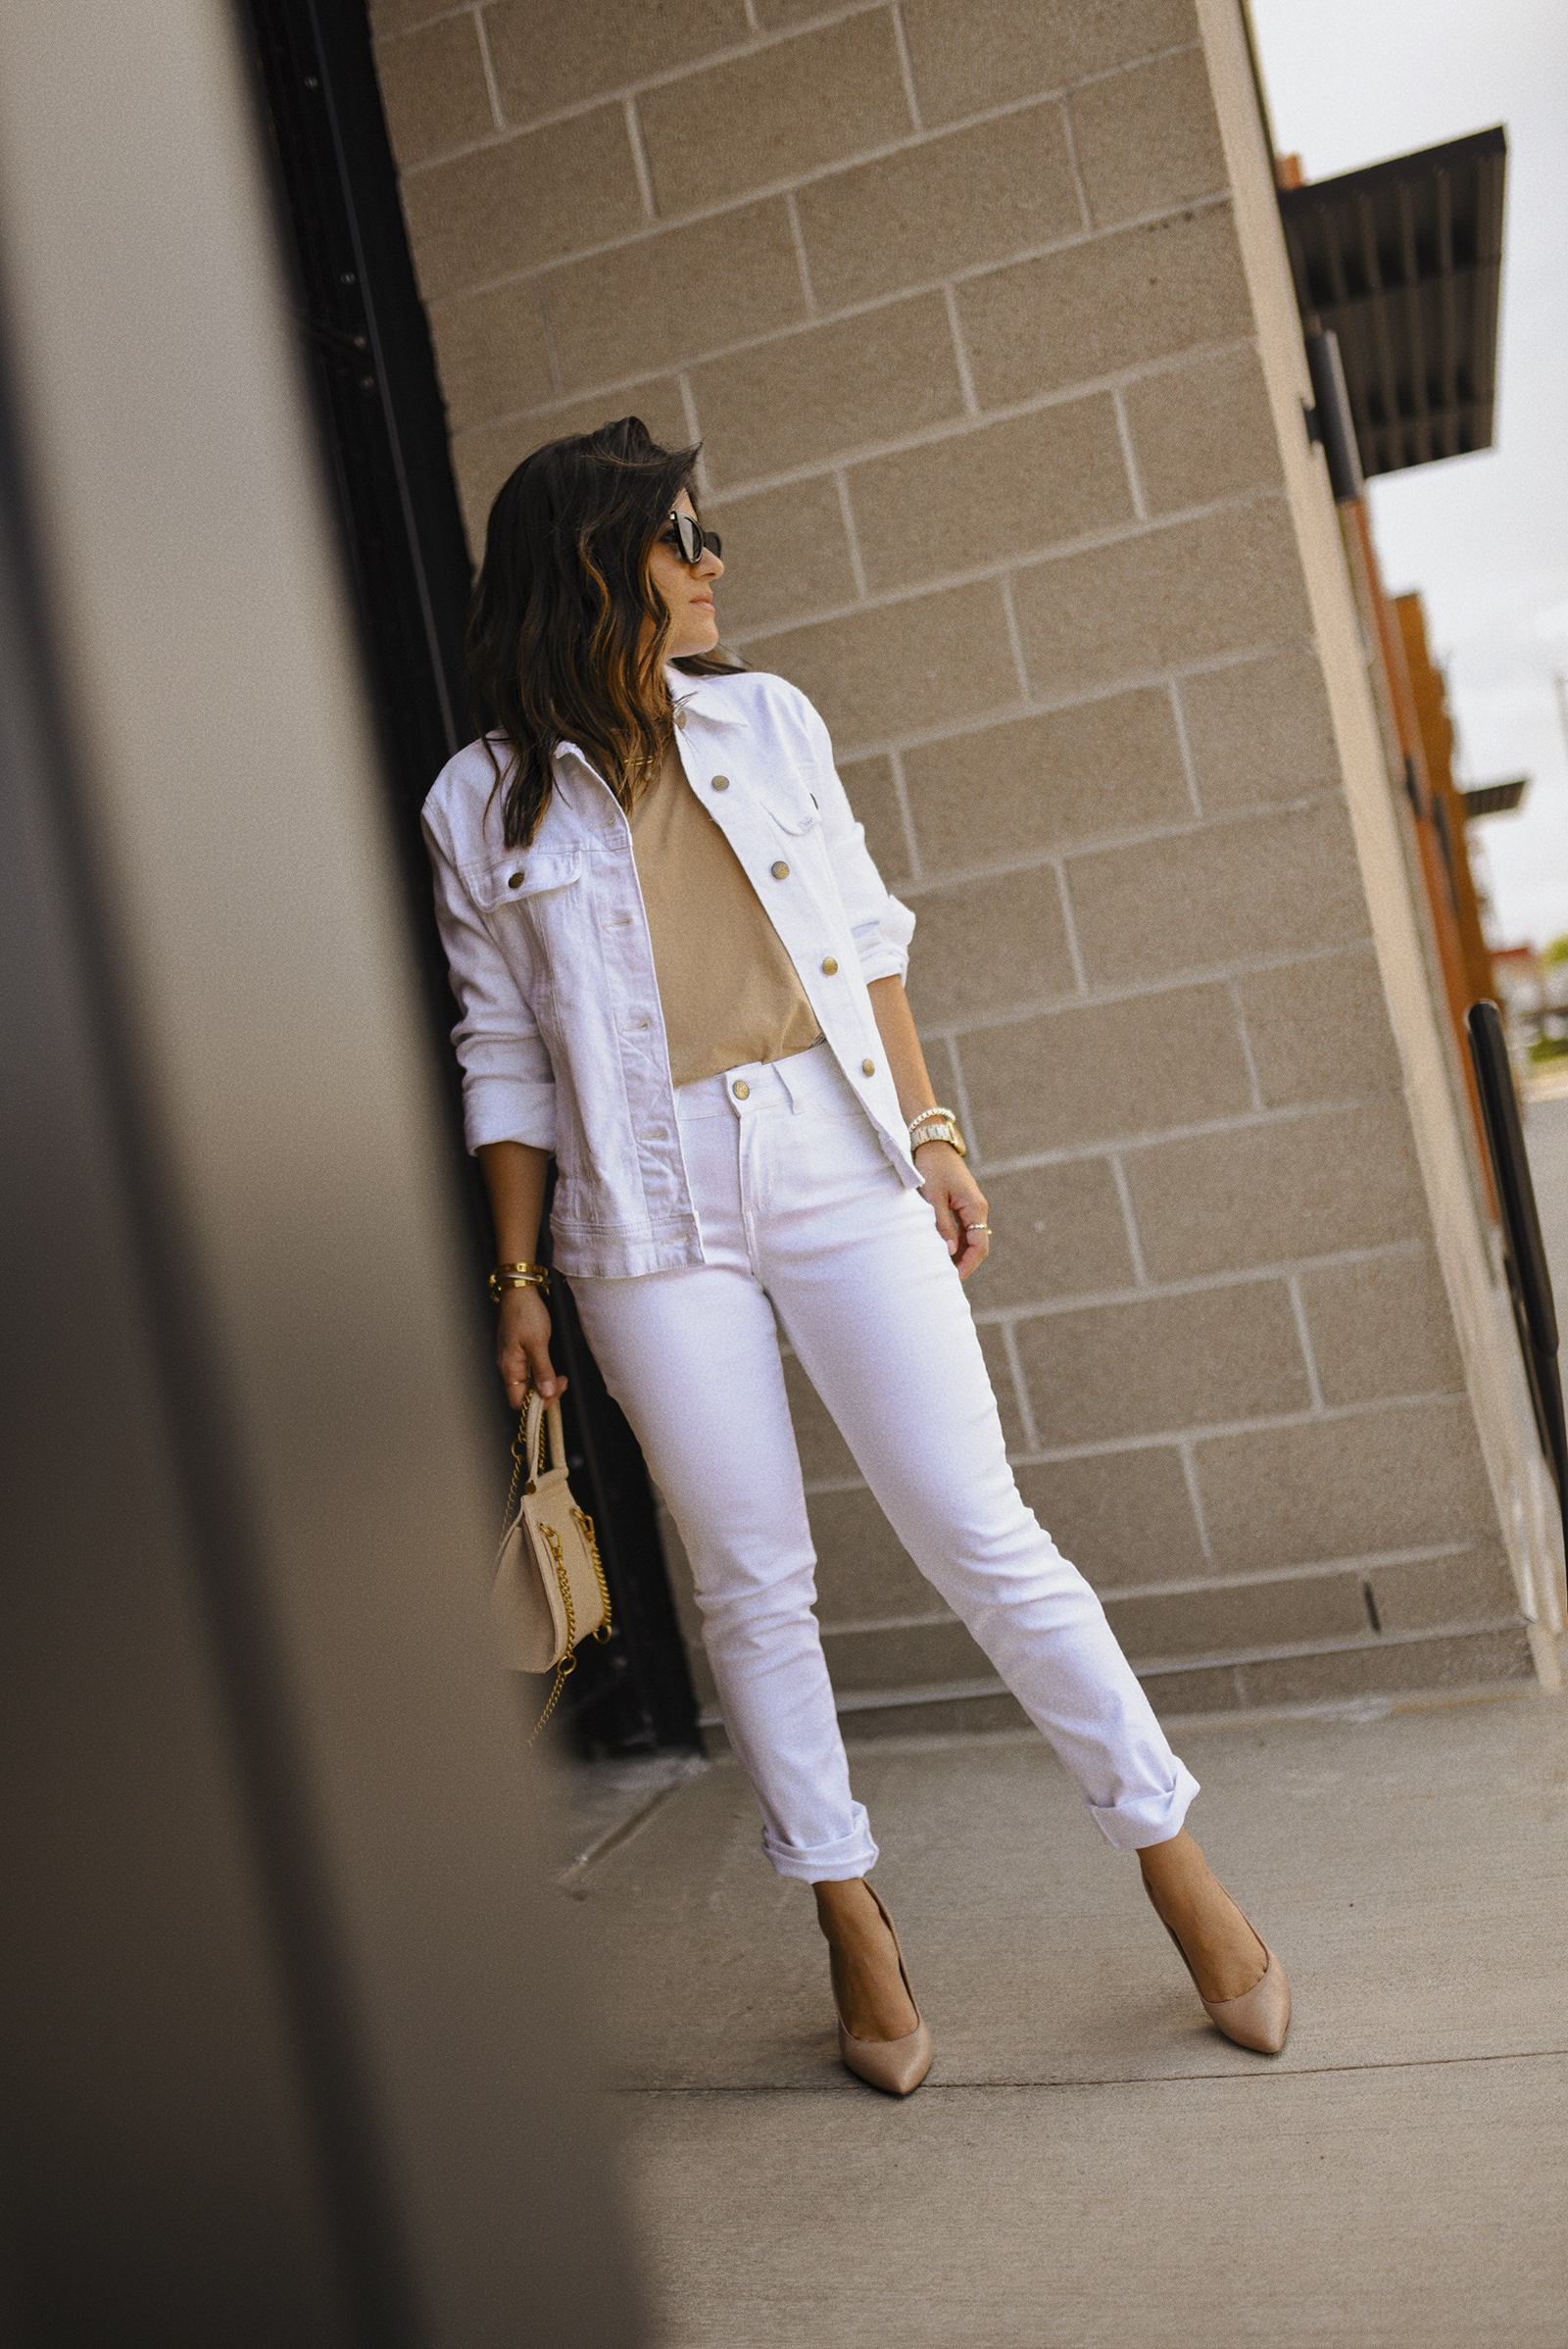 Carolina Hellal of Chic Talk wearing a LEE Jeans white denim jacket and LEE white jeans, Sam Edelman nude pumps and Le Specs last The last Lolita sunglasses